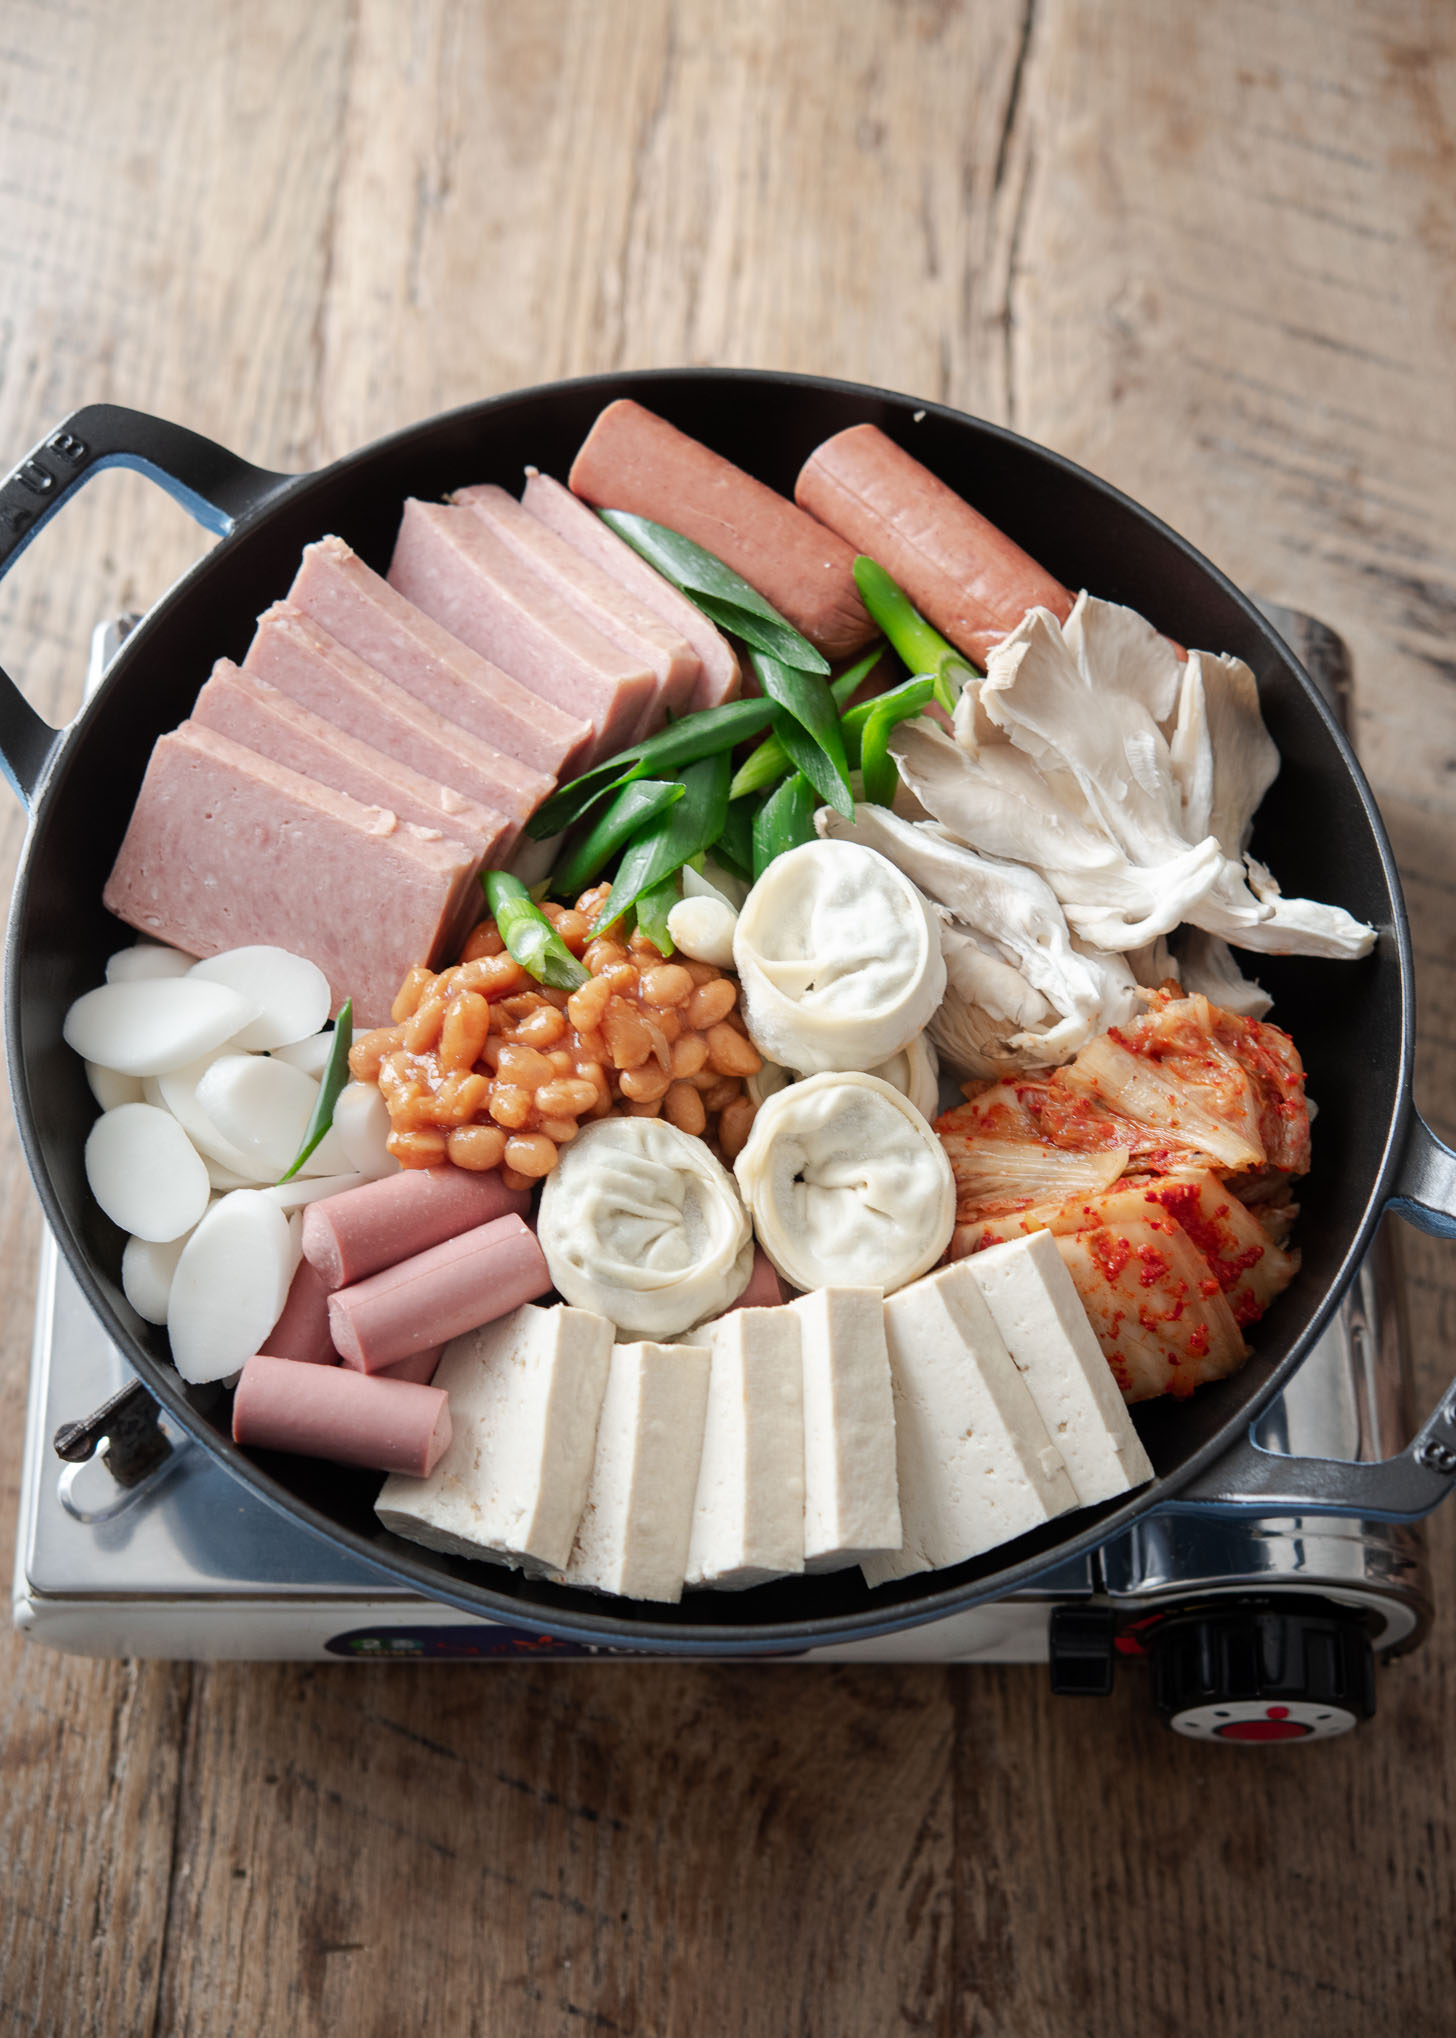 Budae jjigae ingredients are arranged in a pan.